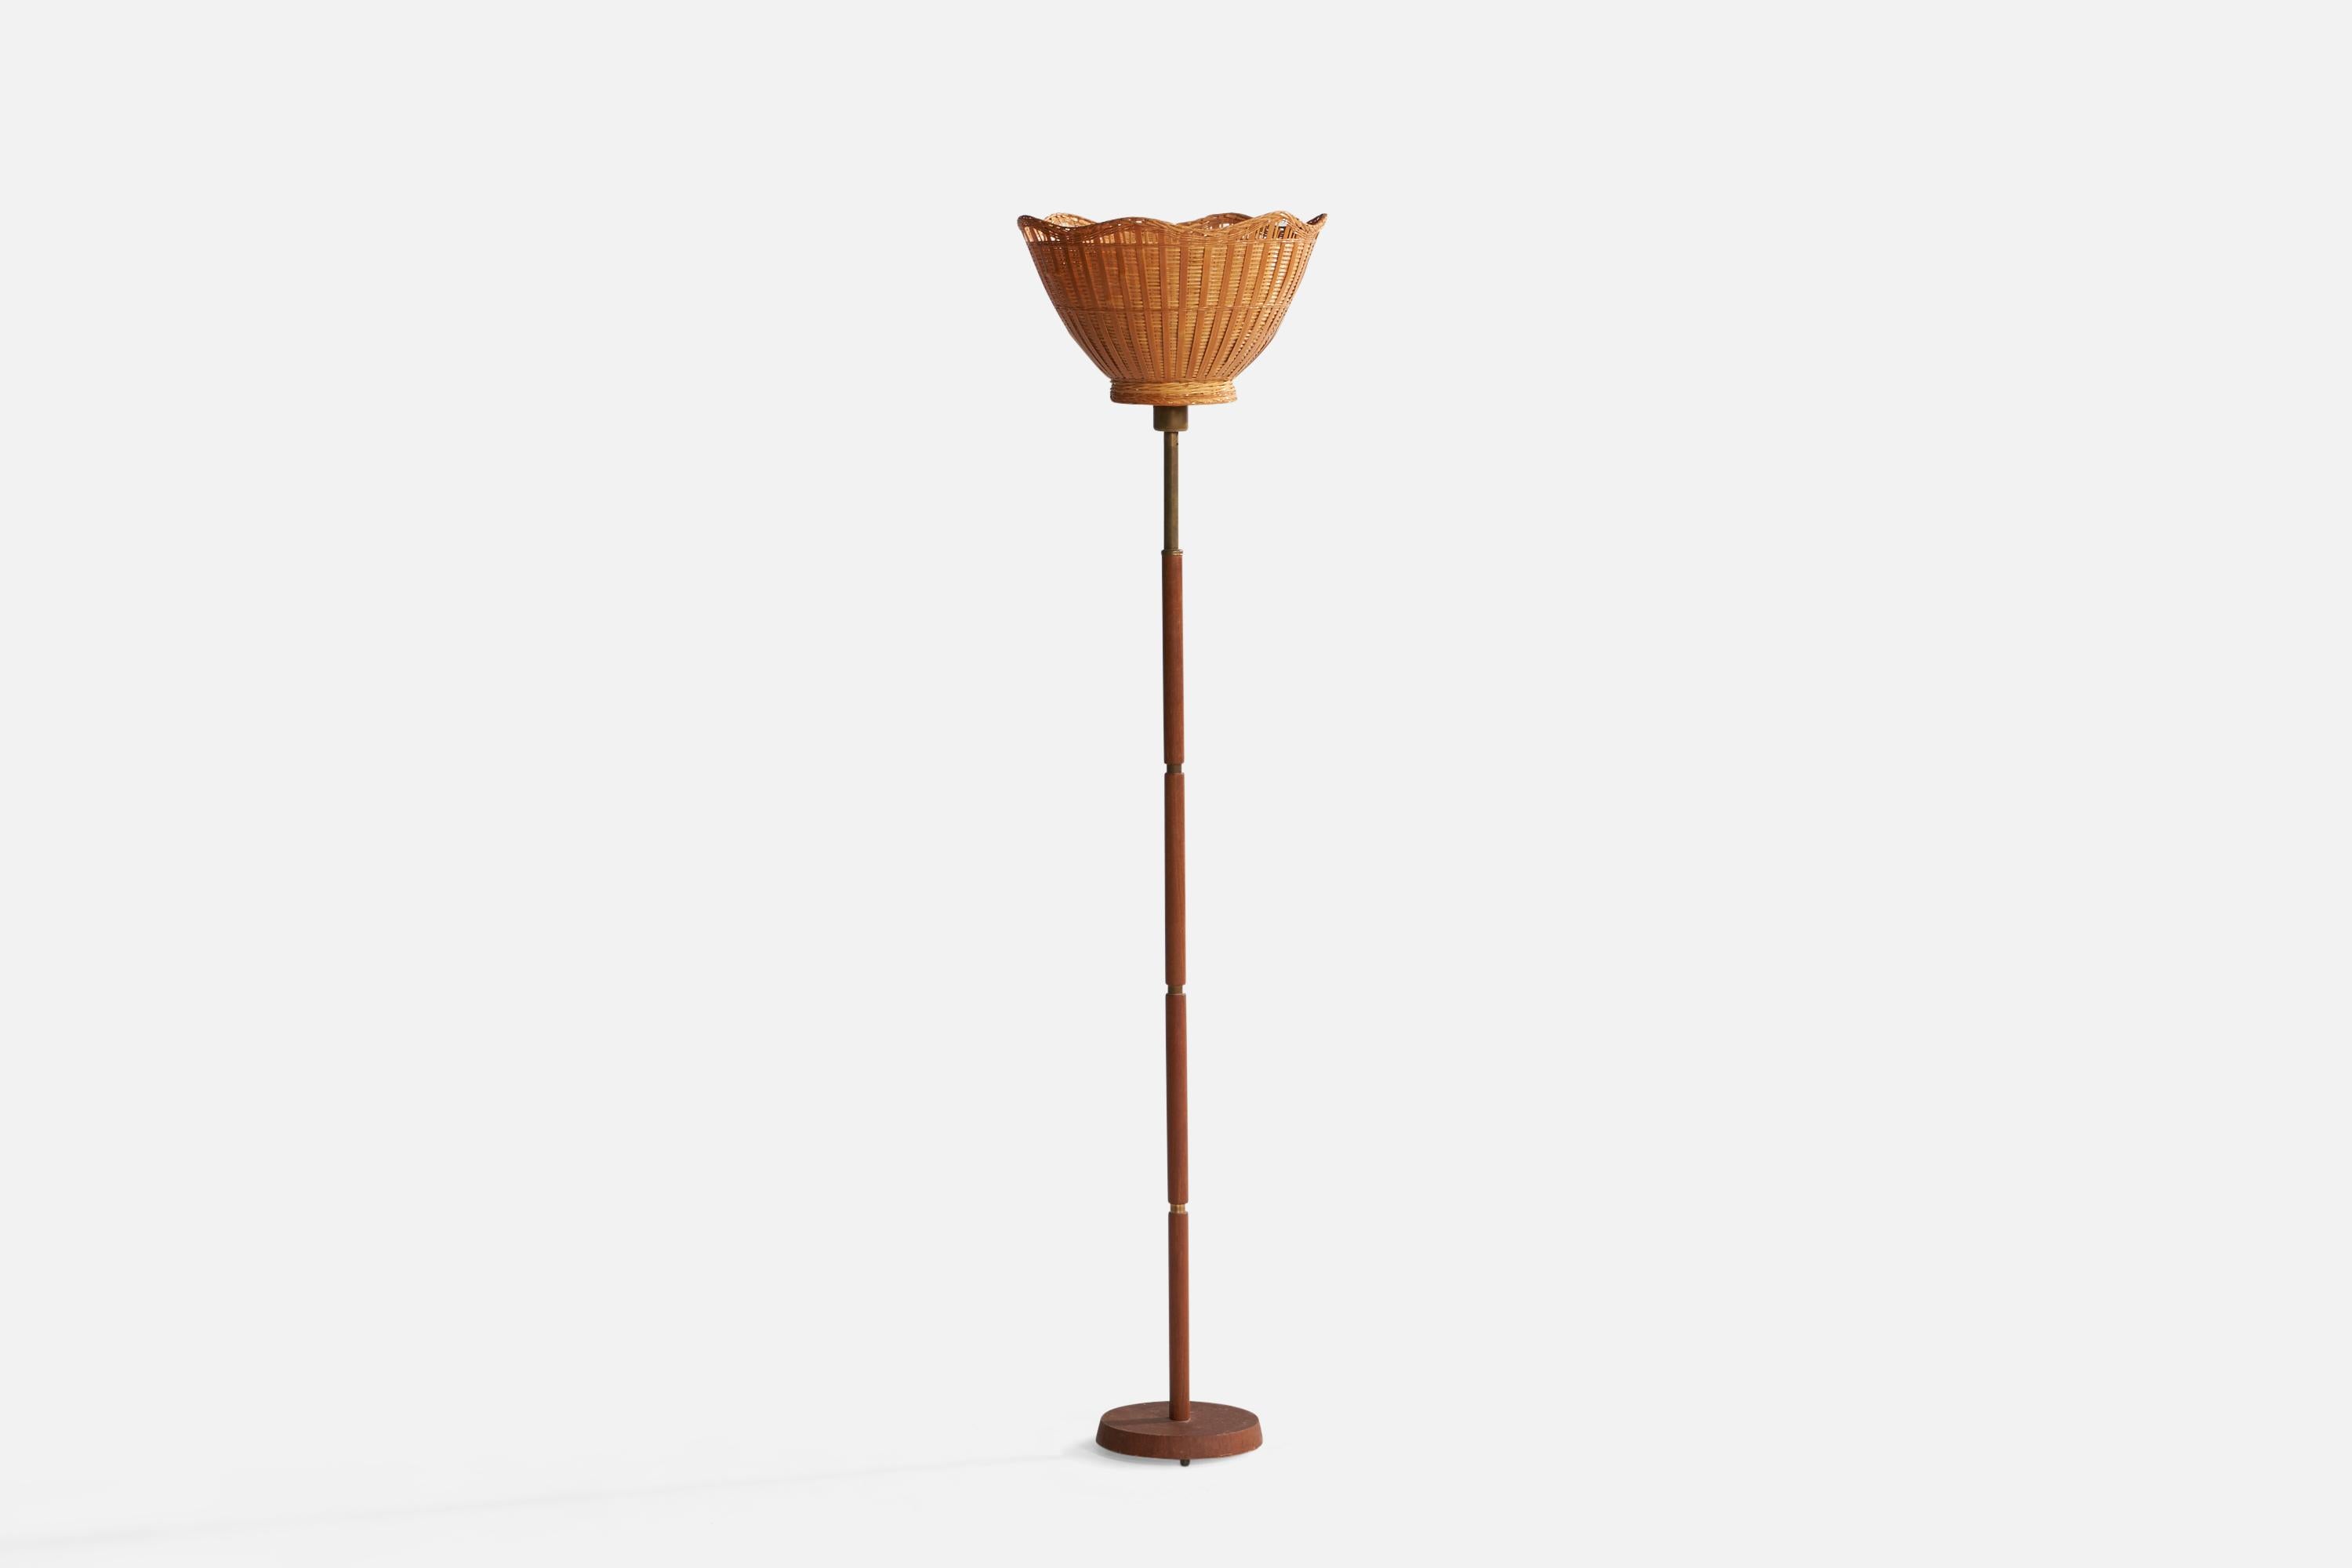 A brass, teak and rattan floor lamp designed and produced in Sweden, 1950s.

Overall Dimensions (inches): 57.38” H x 13.75” Diameter. Stated dimensions include shade.
Bulb Specifications: E-26 Bulb
Number of Sockets: 1
All lighting will be converted